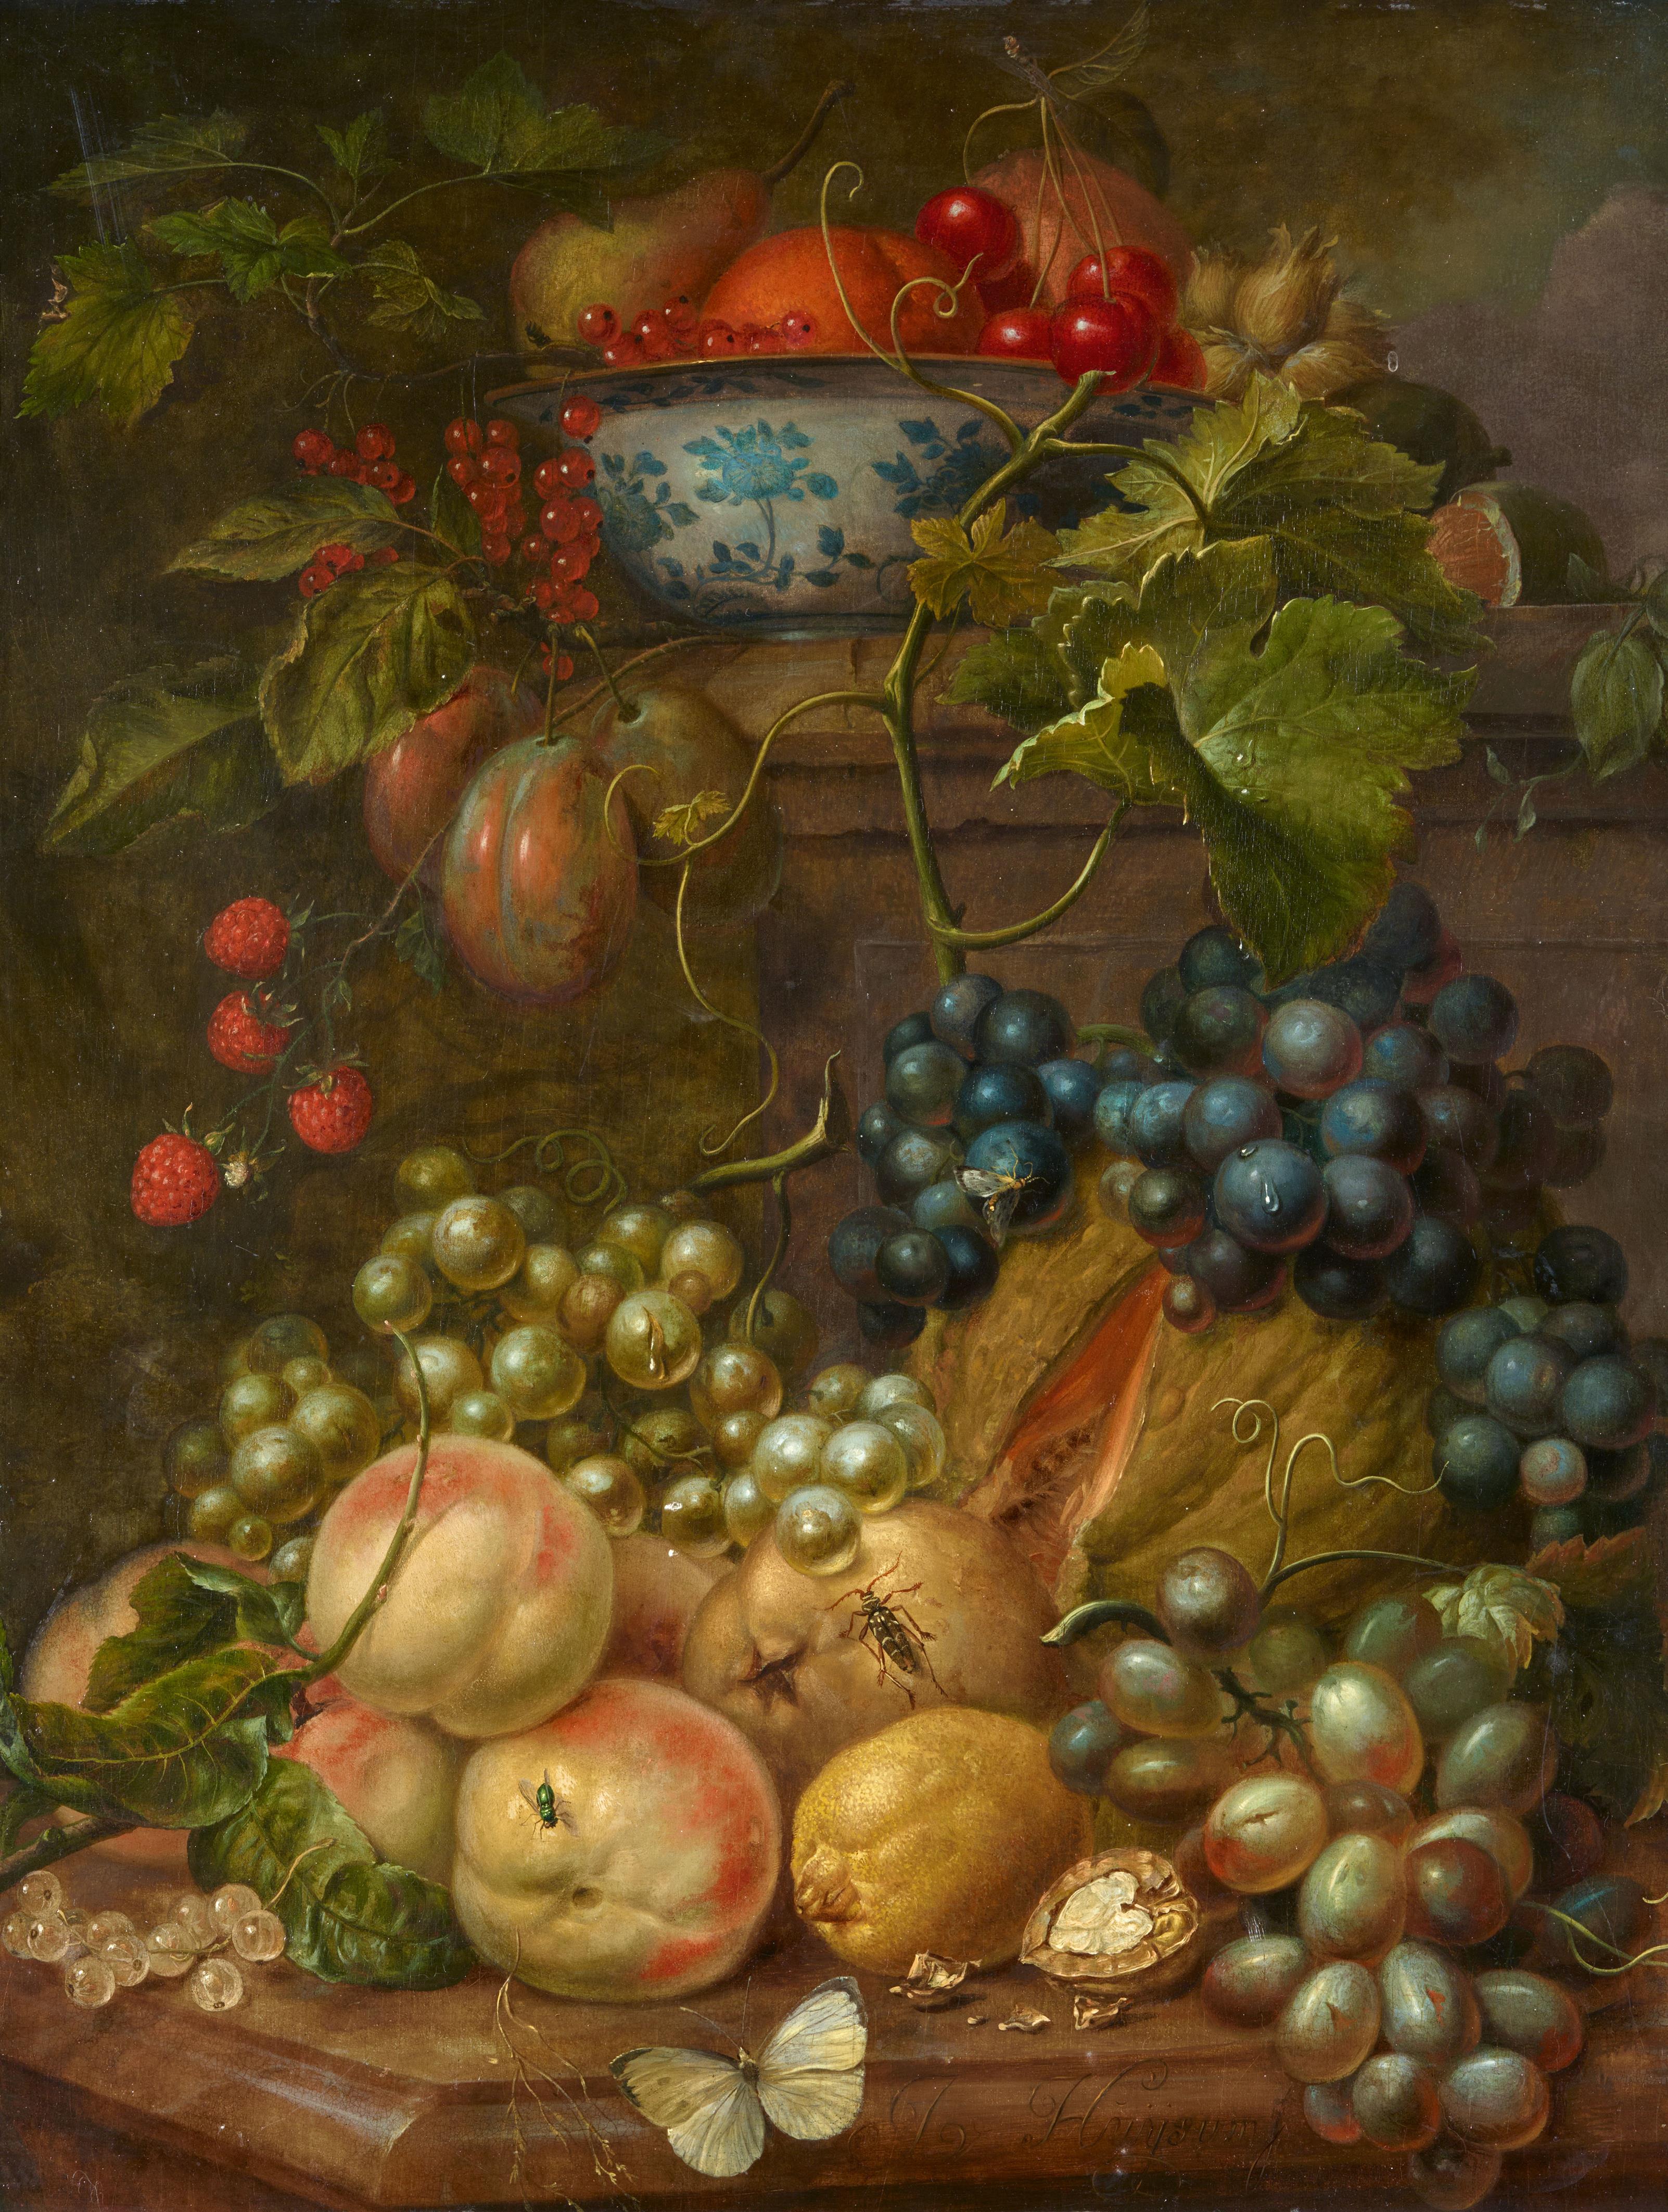 Netherlandish School 18th century - Fruit Still Life with Peaches, Grapes, Melon, Pears, Currants, Raspberries, Plums, Cherries and a Porcelain Bowl - image-1